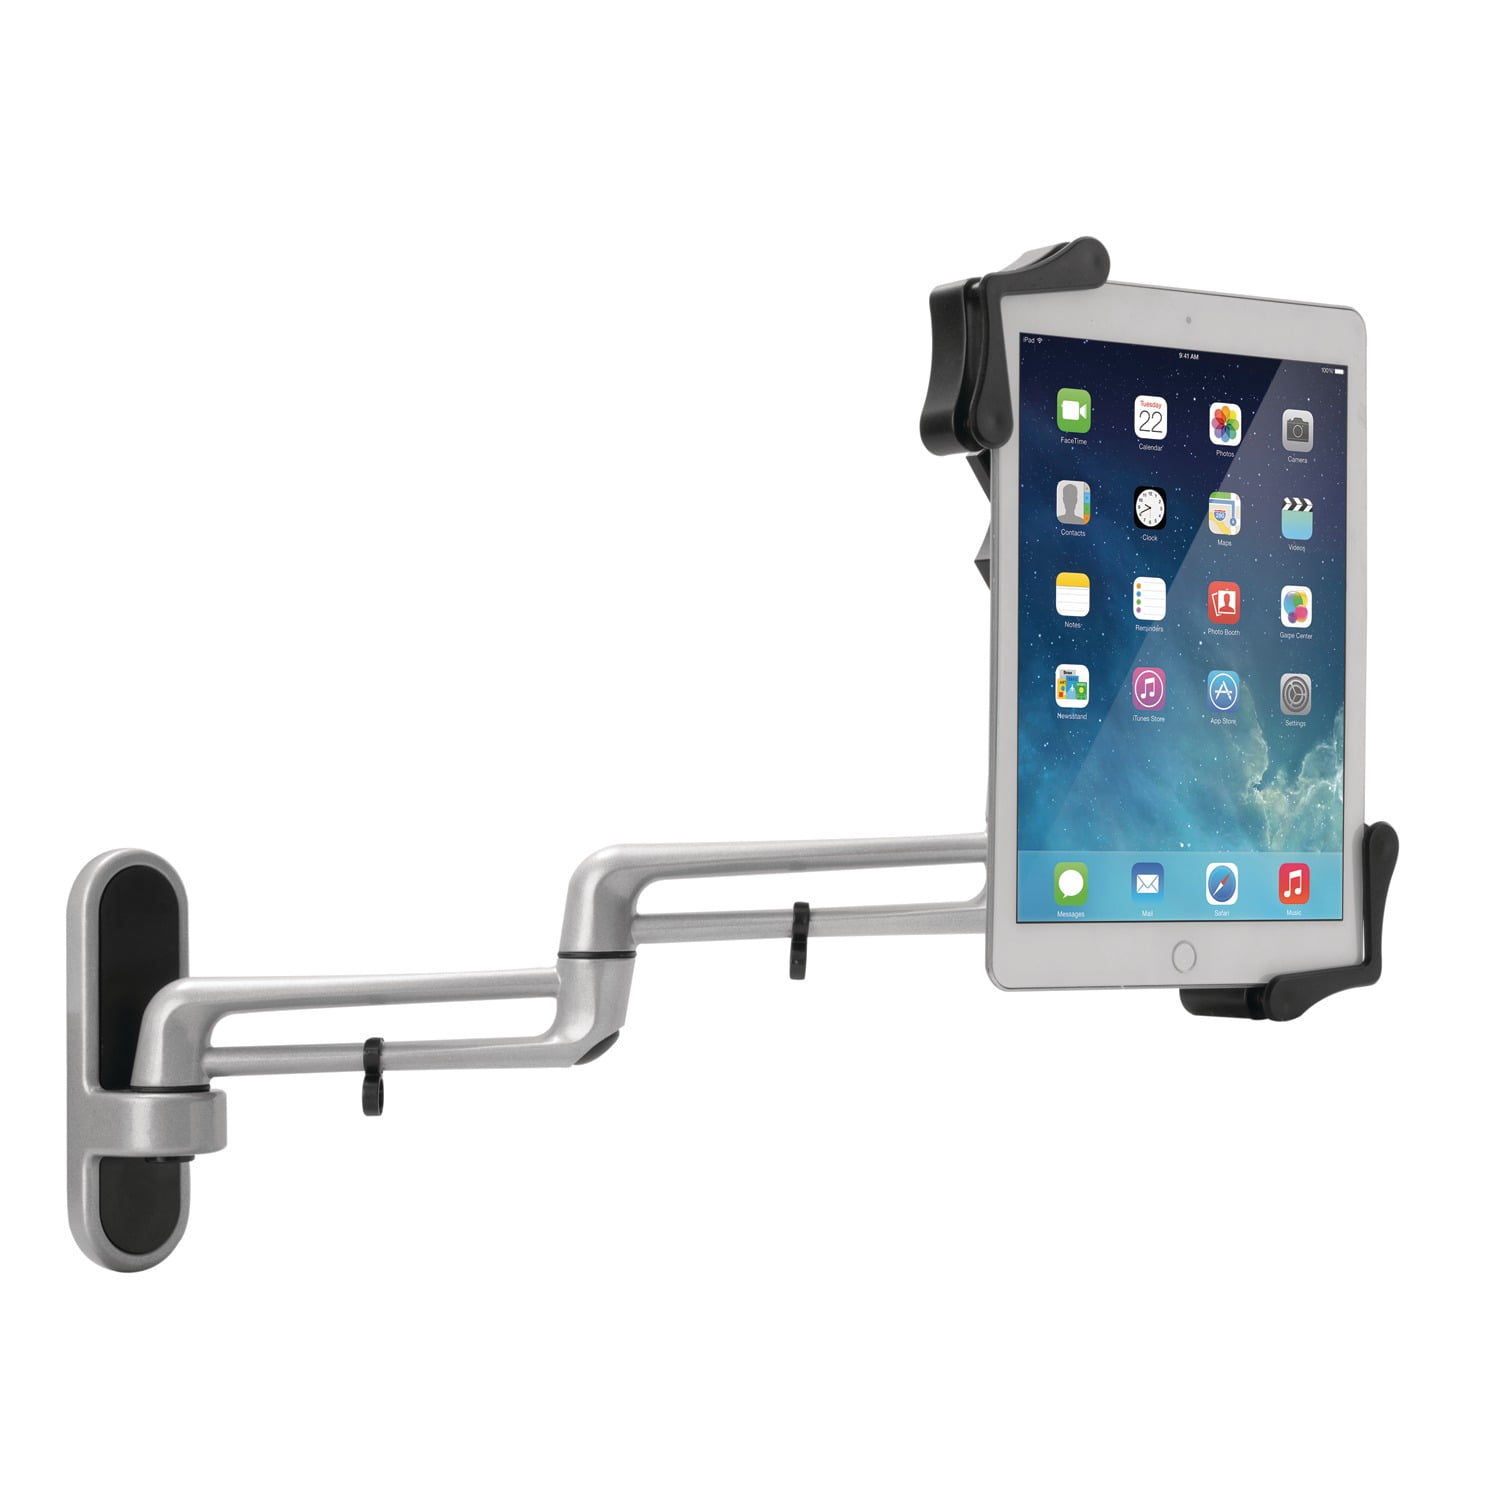 CTA Digital Wall Under Cabinet Desk Mount For Tablets W 2 Mounting